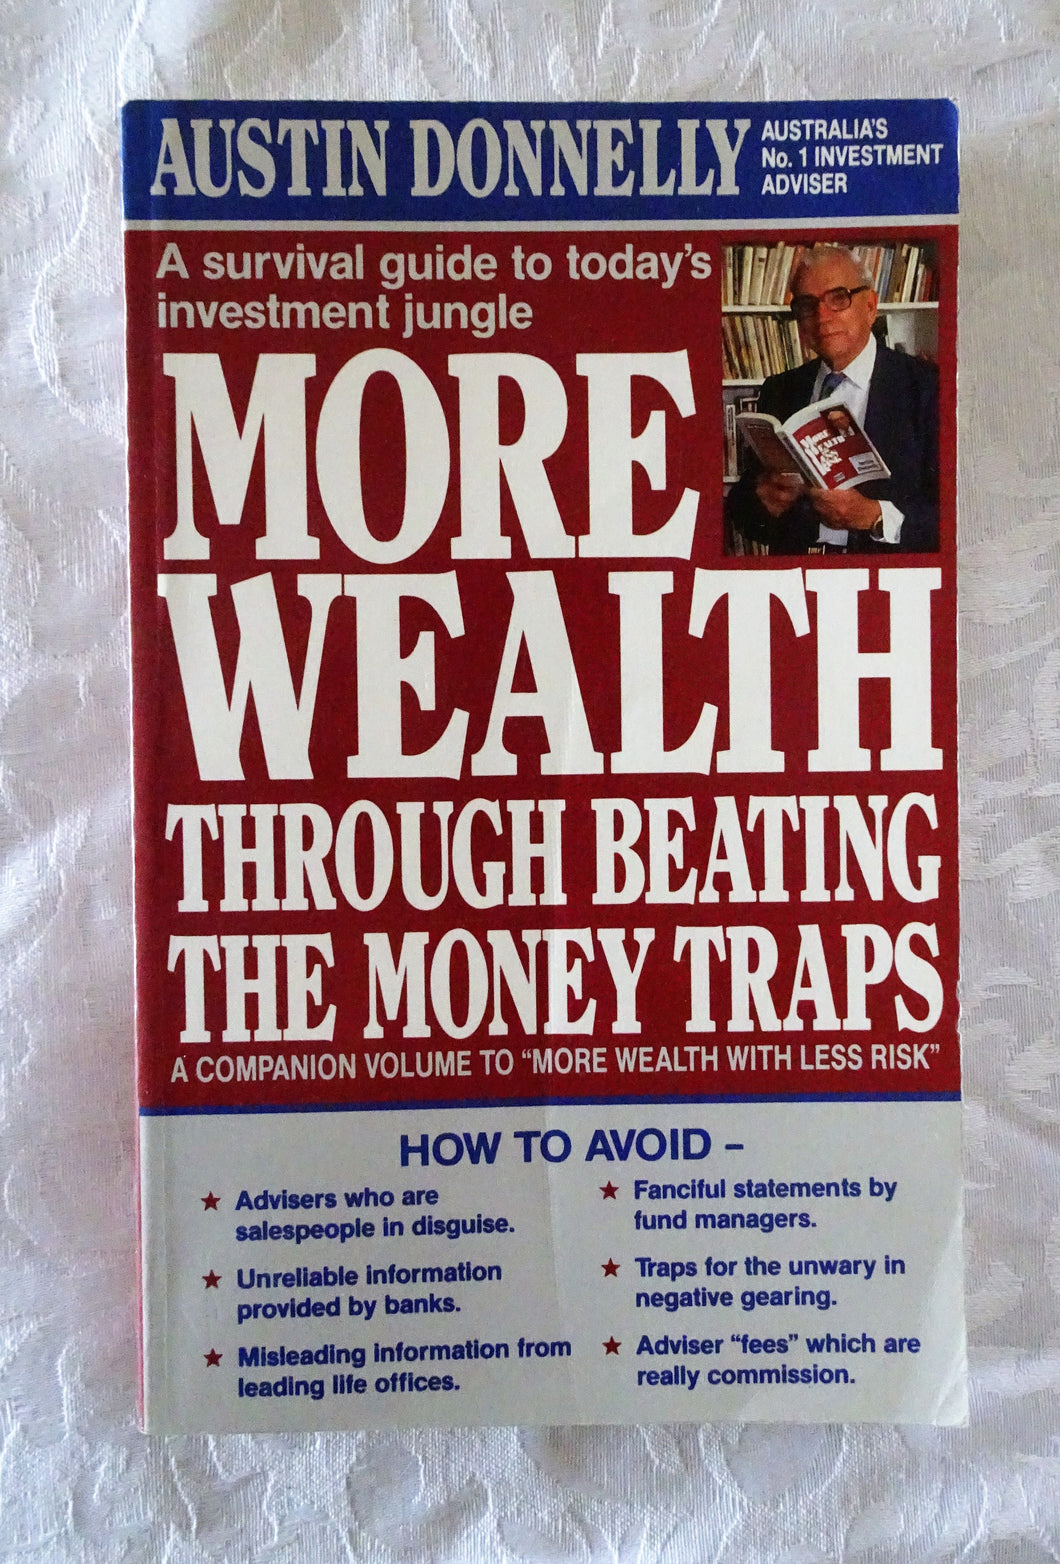 More Wealth Through Beating The Money Traps by Austin Donnelly